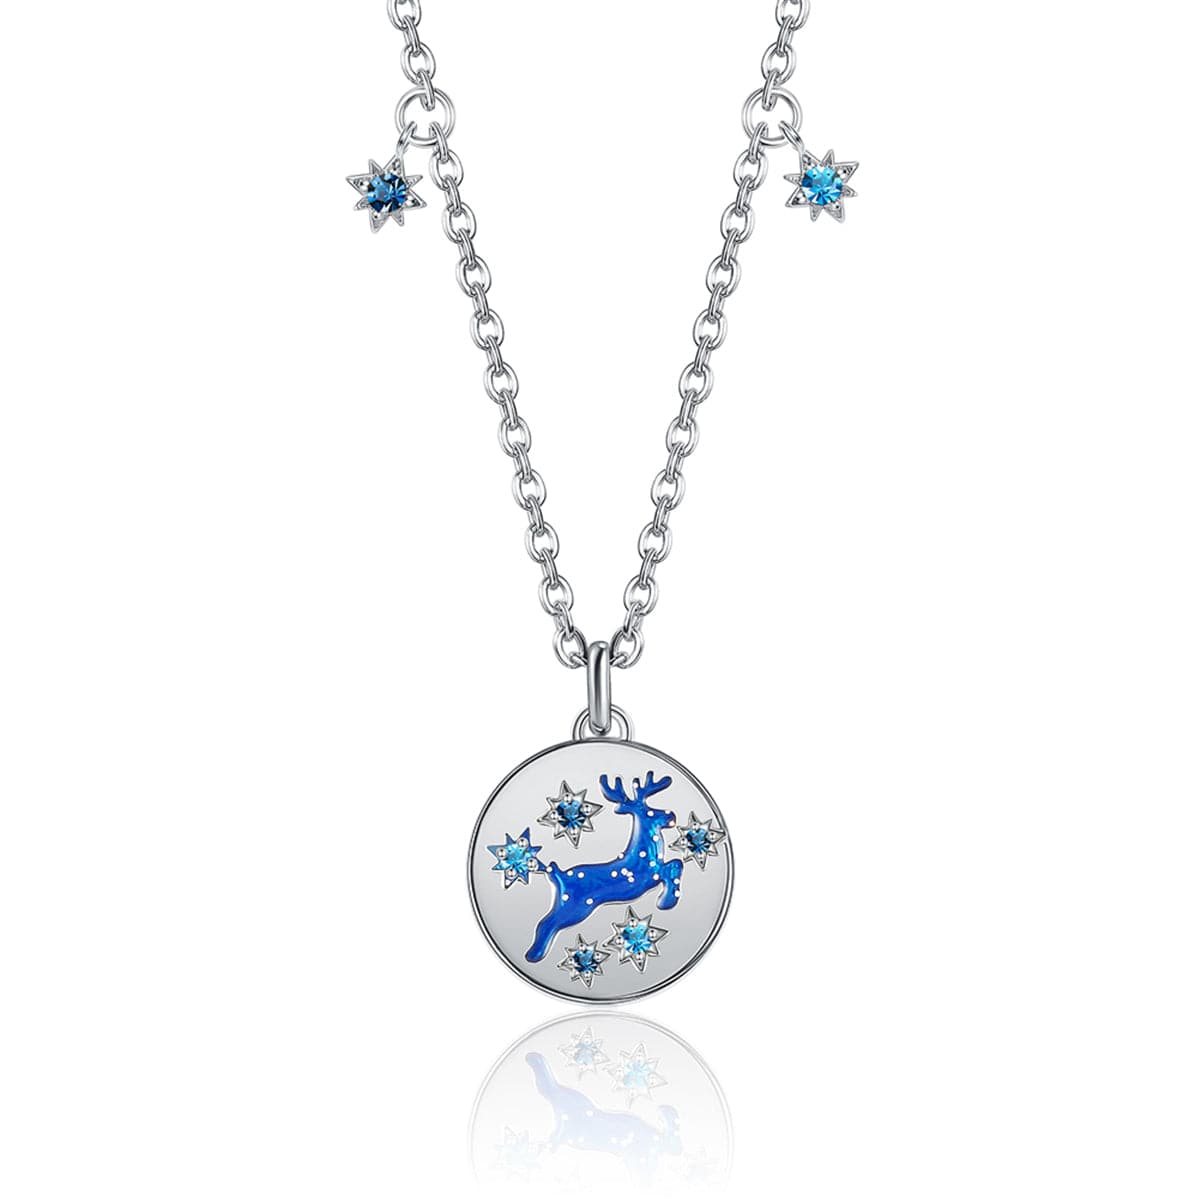 Blue Cubic Zirconia & Sterling Silver Reindeer Pendant Necklace